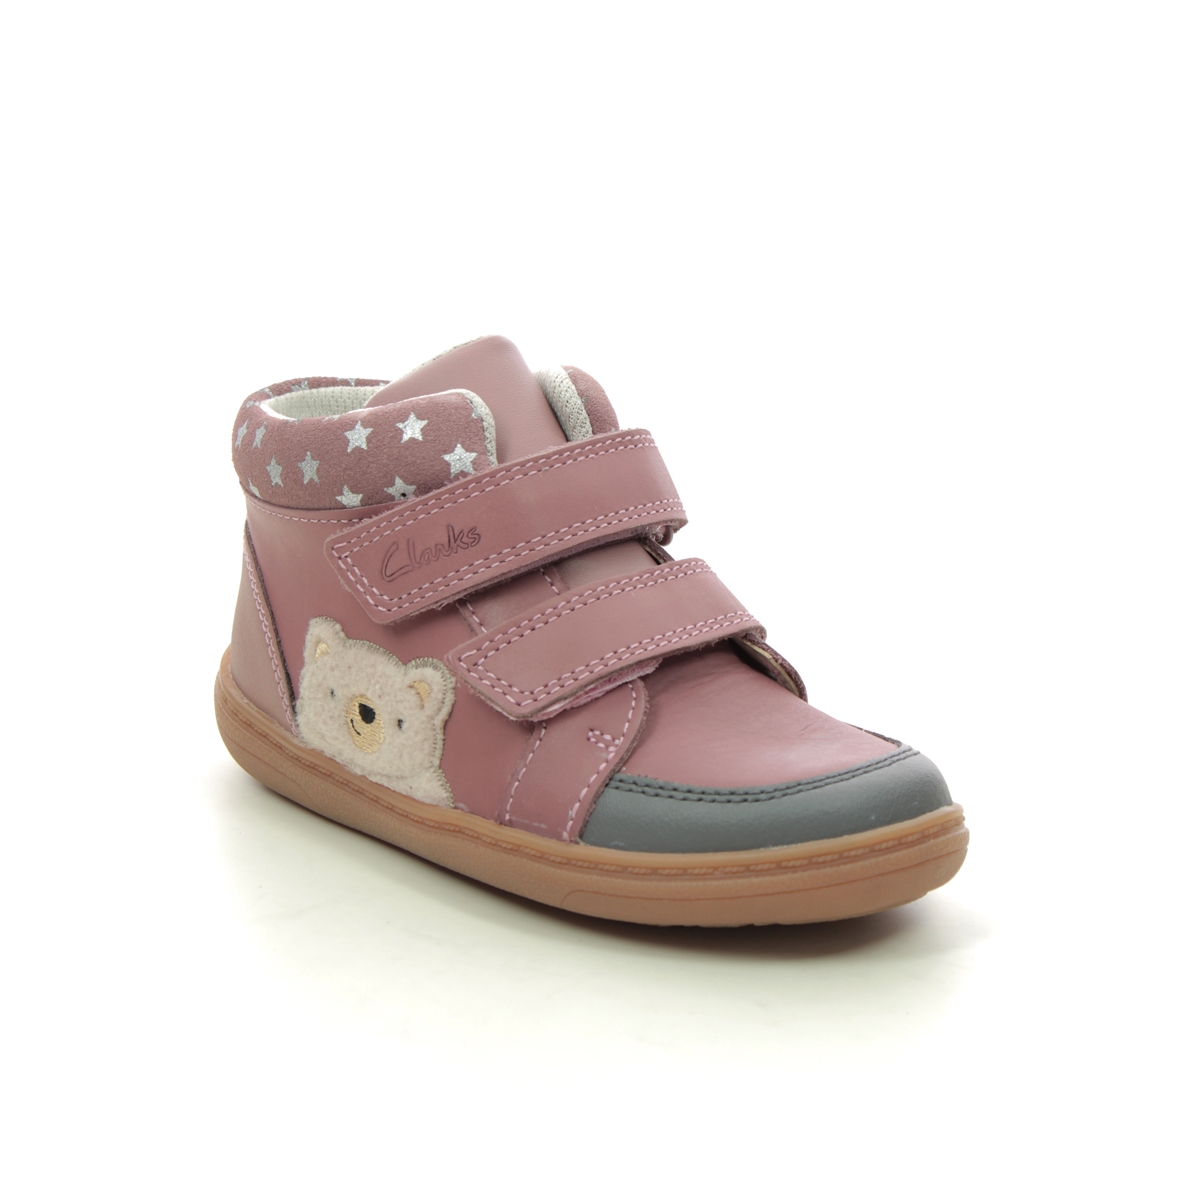 Clarks K Fit Pink Leather Toddler Girls Boots